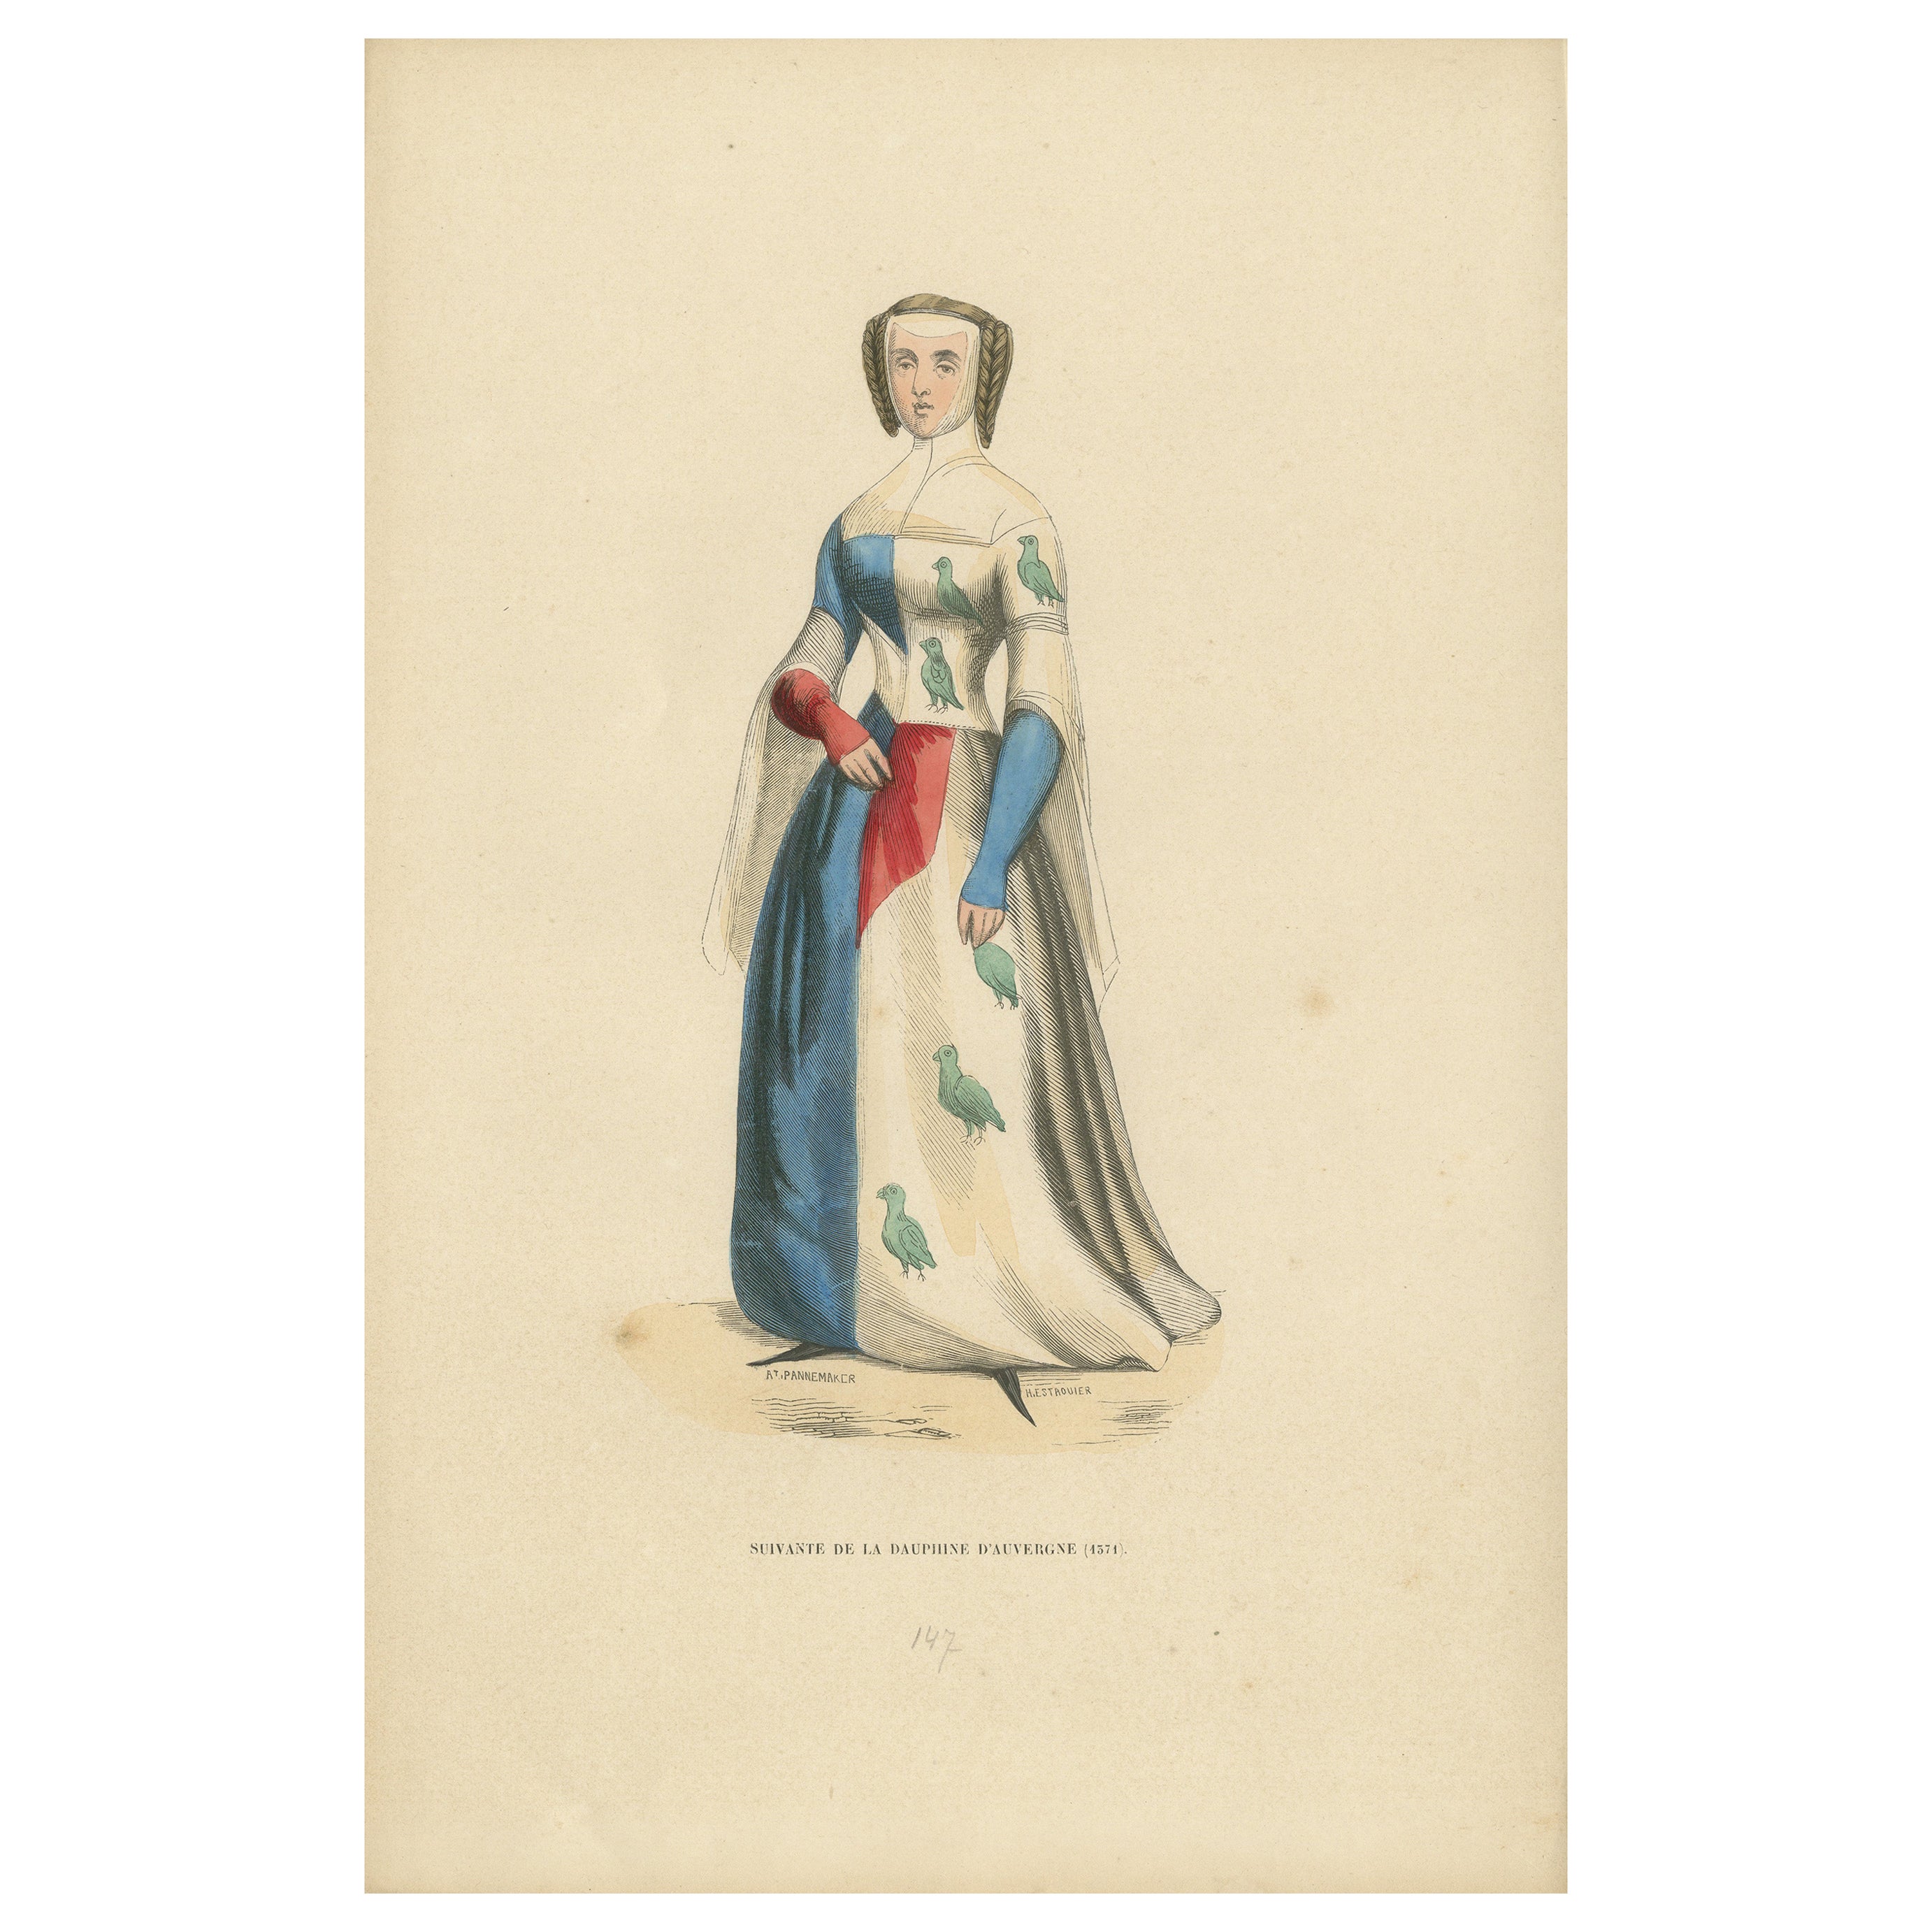 Courtly Refinement: A Lady-in-Waiting to the Dauphine of Auvergne, 1847